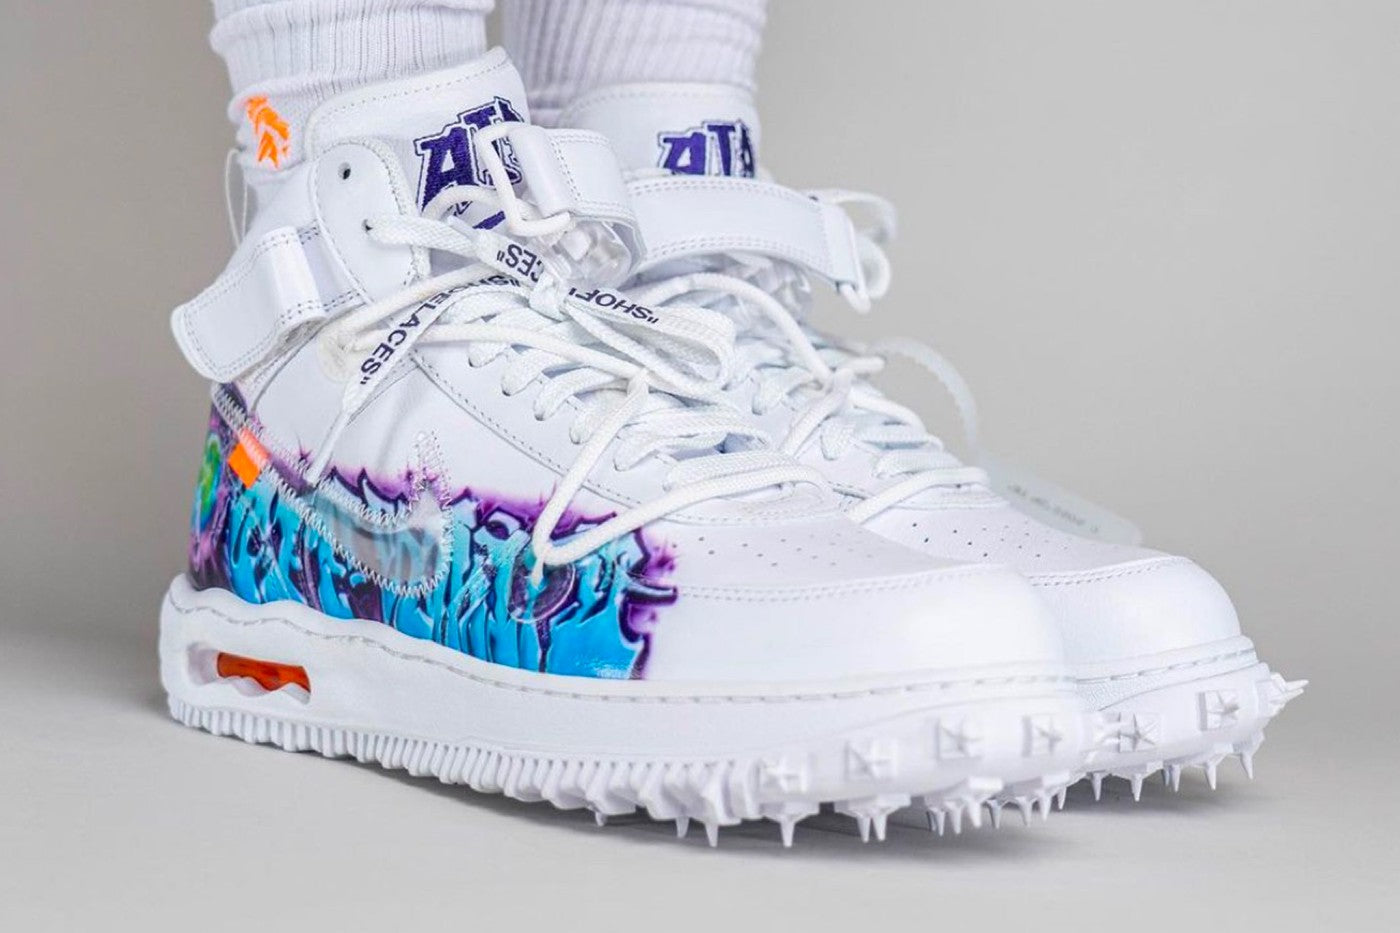 The Off-White x Nike Air Force 1 Mid 